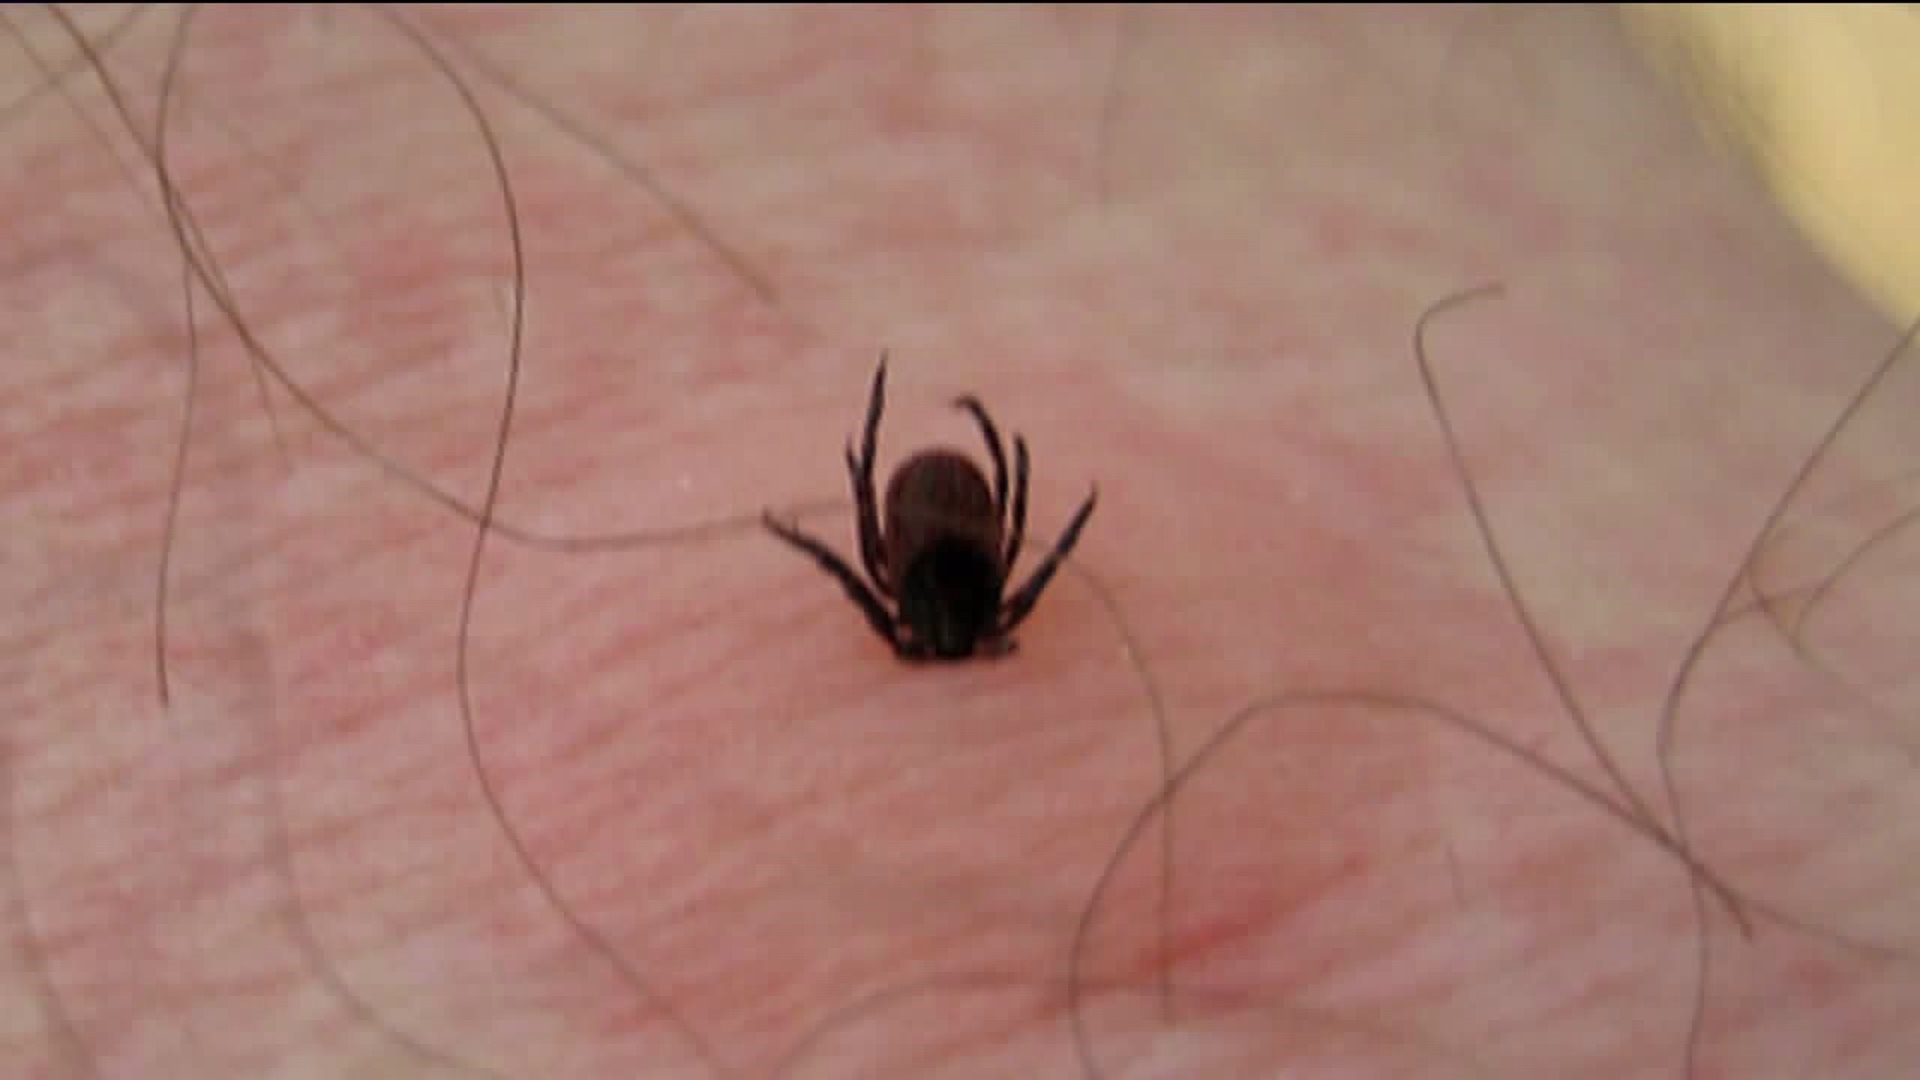 New Health Center Opening for People with Tick-Borne Diseases